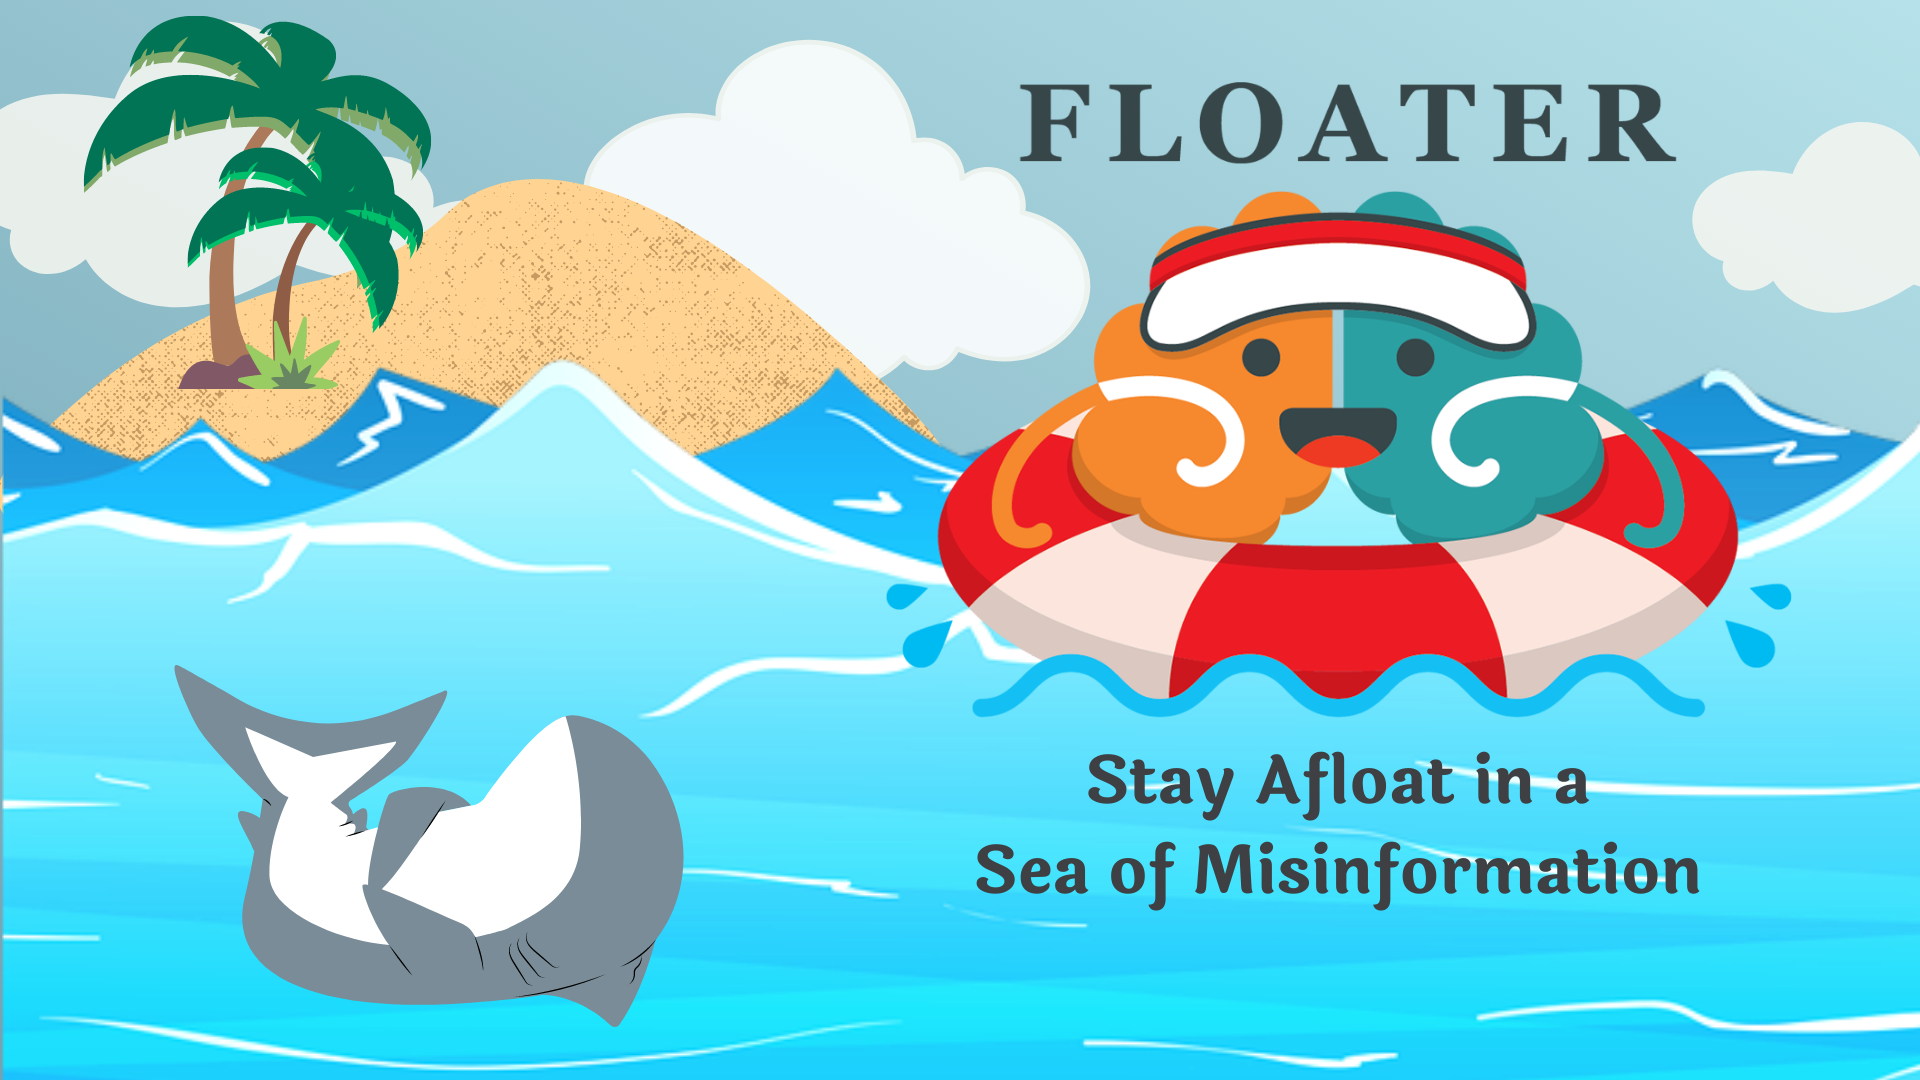 Thinking Is Power FLOATER, Stay afloat in a sea of misinformation